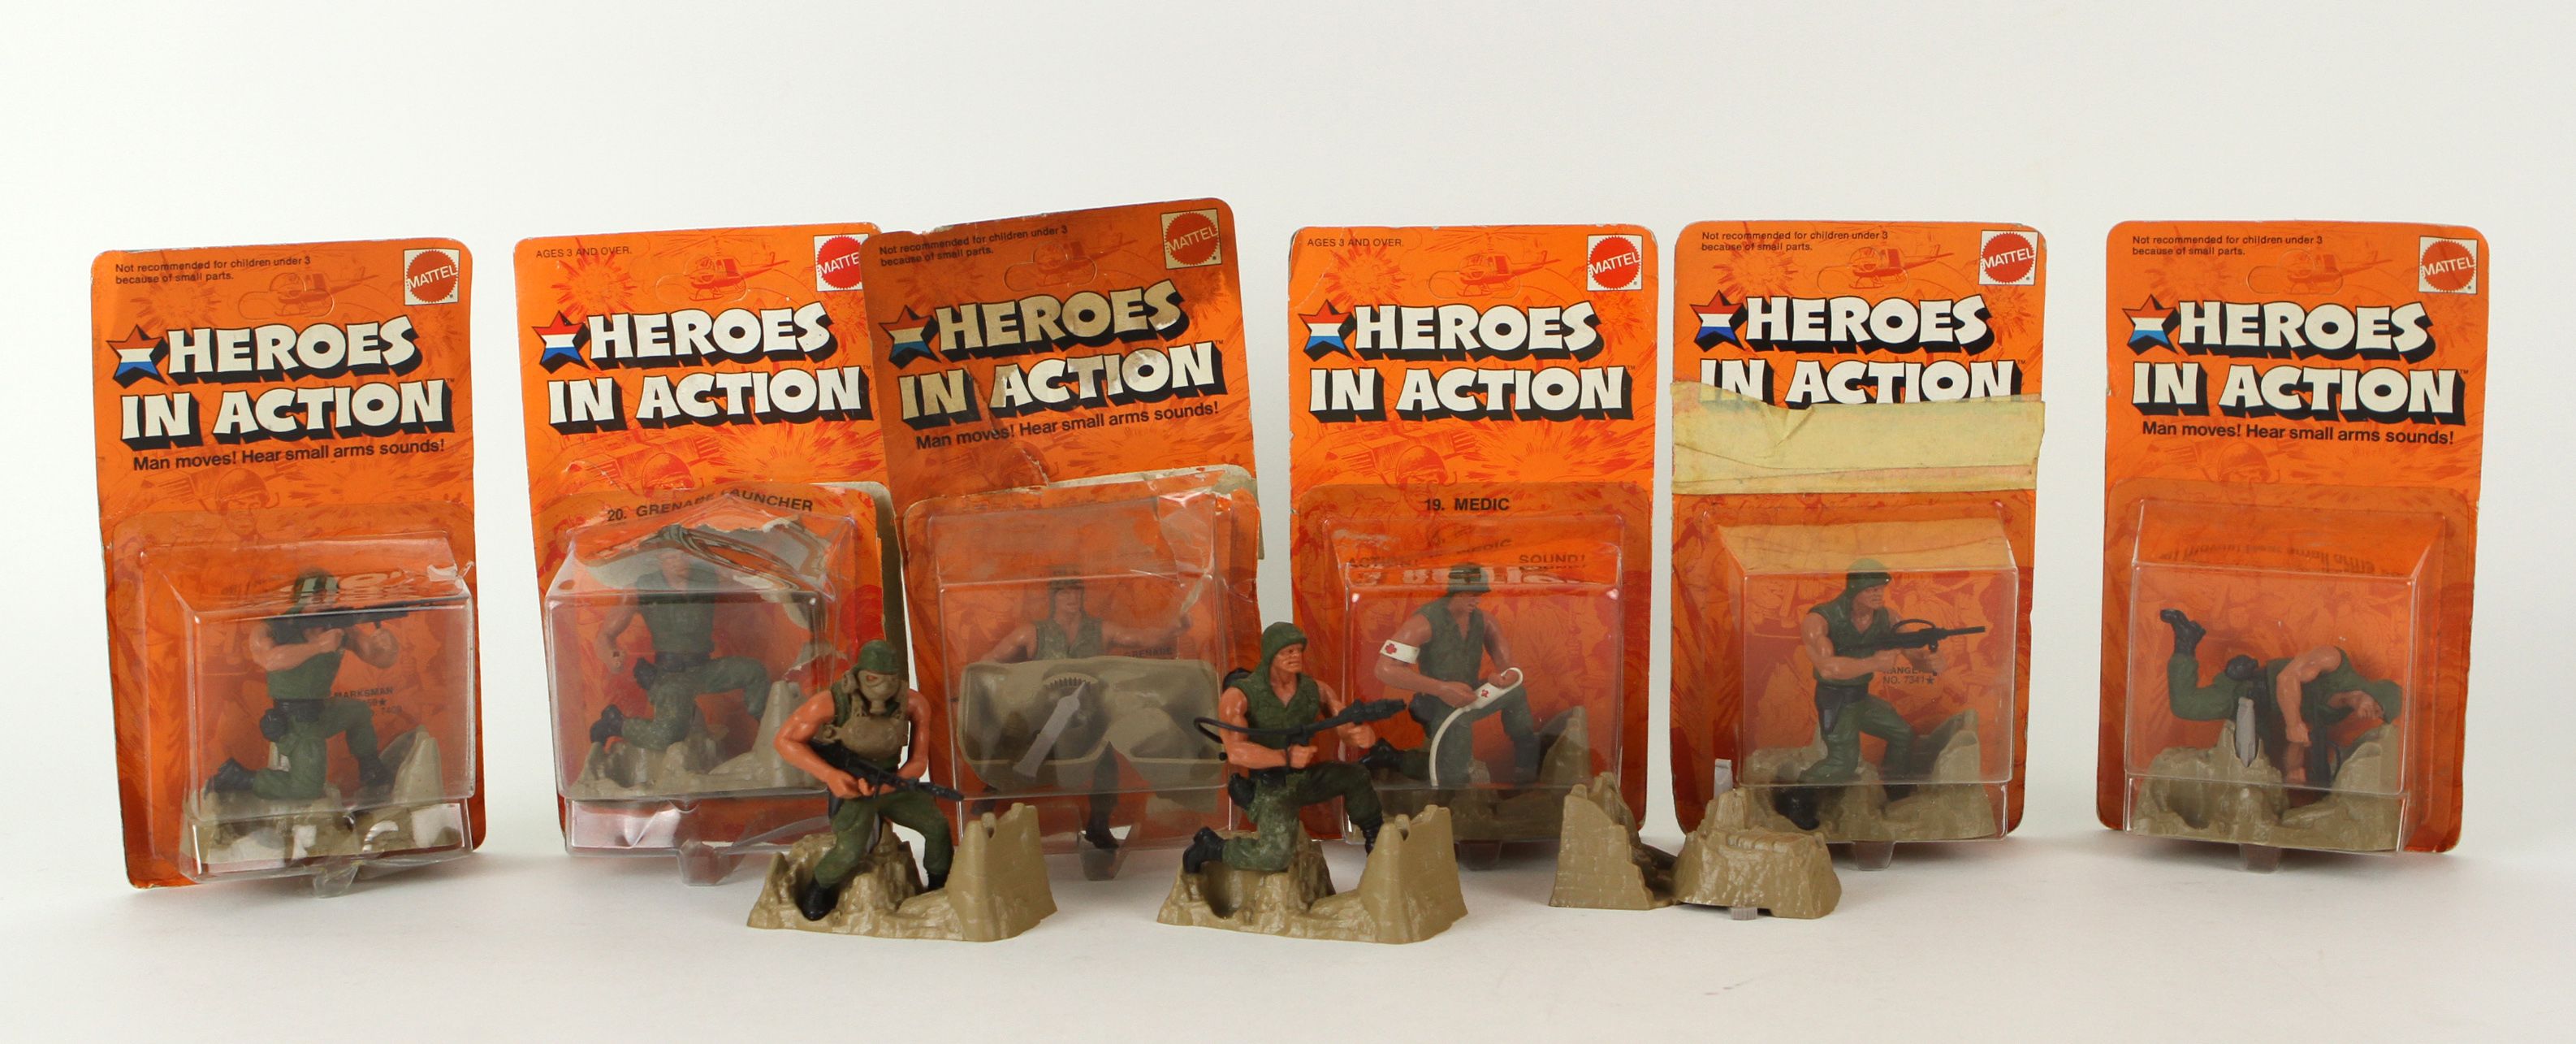 heroes in action toys